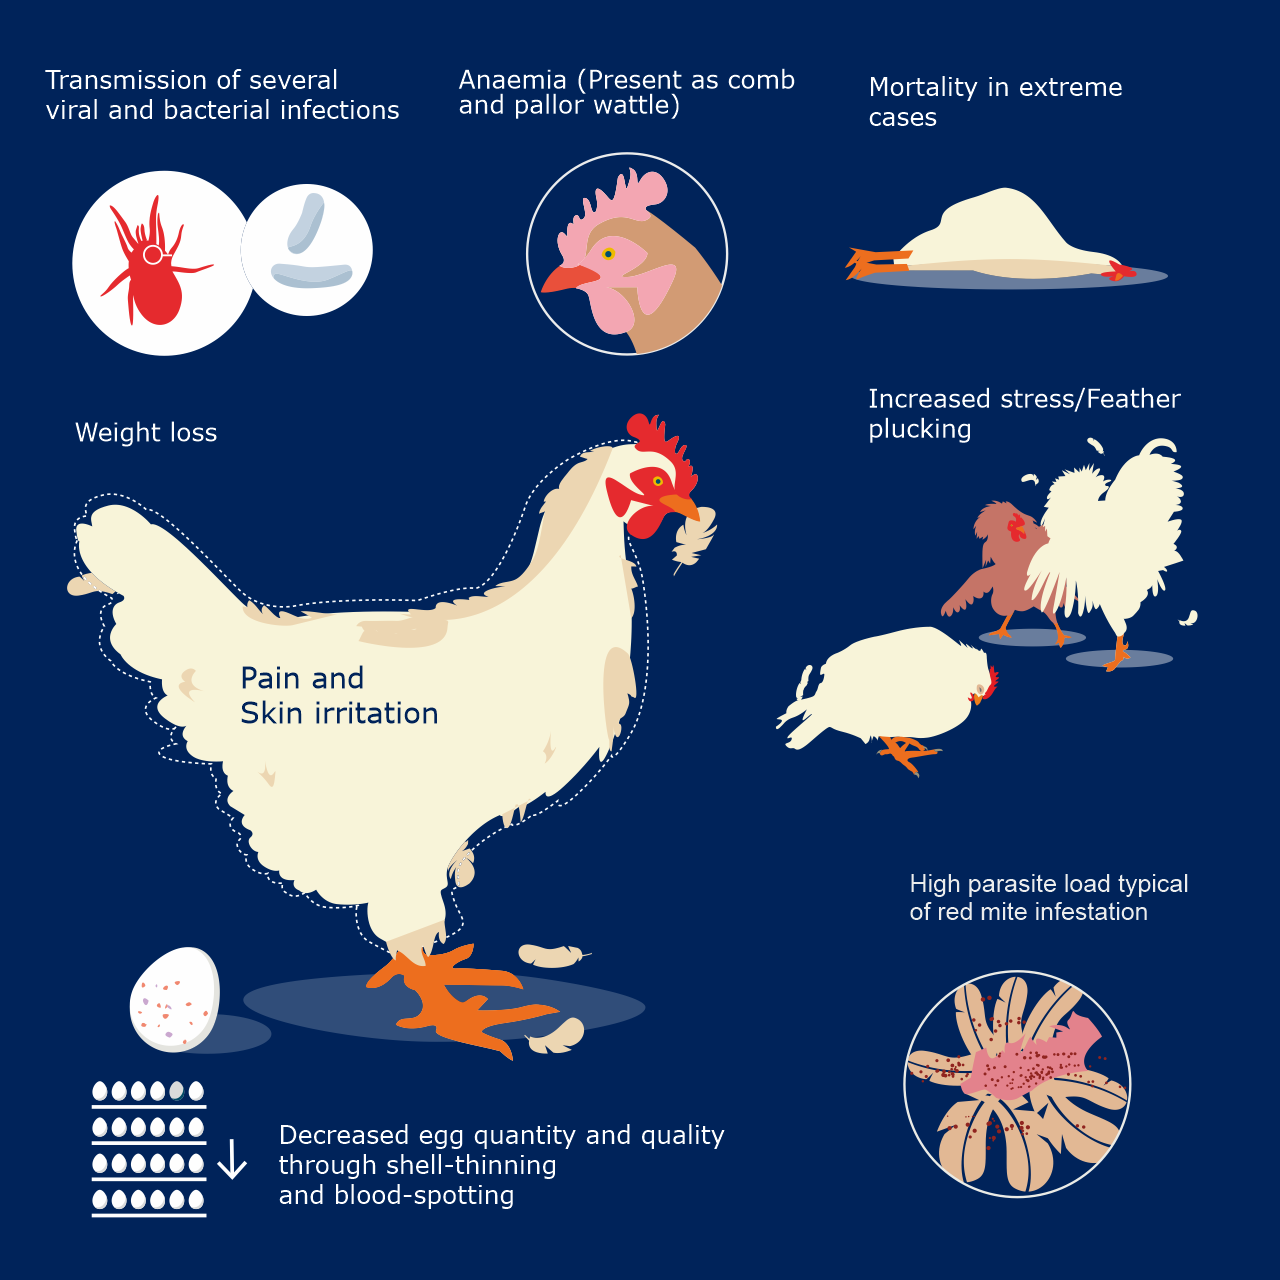 Red mite management in poultry - Prevent mite infestation in poultry - Control red mite Dermanyssus gallinae in poultry - Prevent mite infestation in poultry - Vinayak